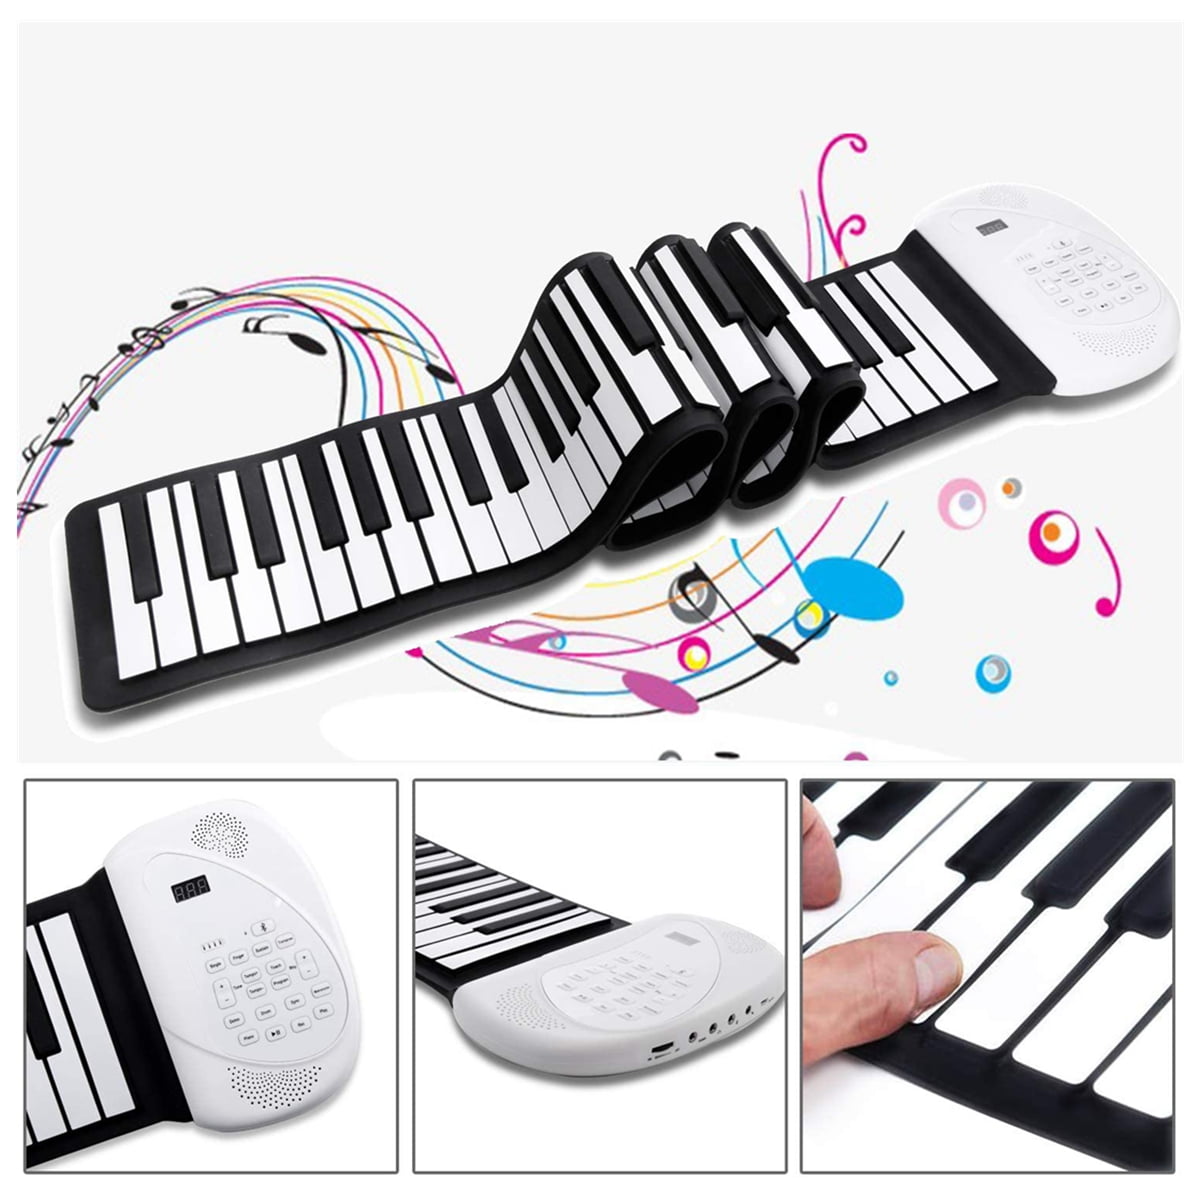 Roll Up Piano 88 Keys Electronic Piano Keyboard Premium Grade Silicone Portable Music Keyboard with Bluetooth Microphone Piano Built-in Loudspeaker Rechargeable Battery for Beginners Gift 